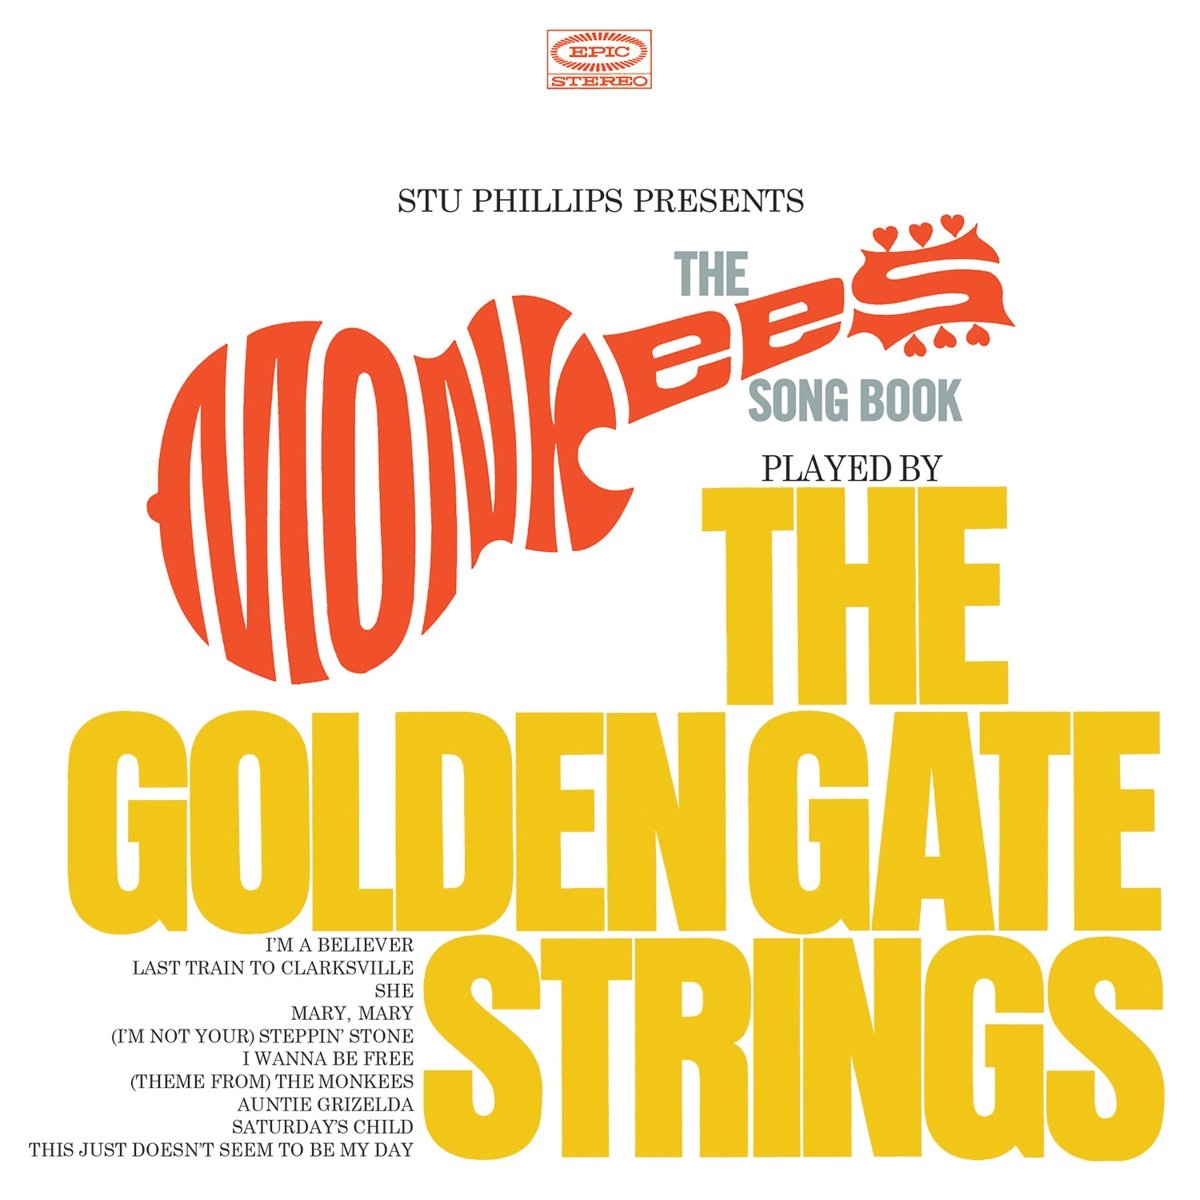 Stu Phillips Presents: The Monkees Songbook Played By The Golden Gate